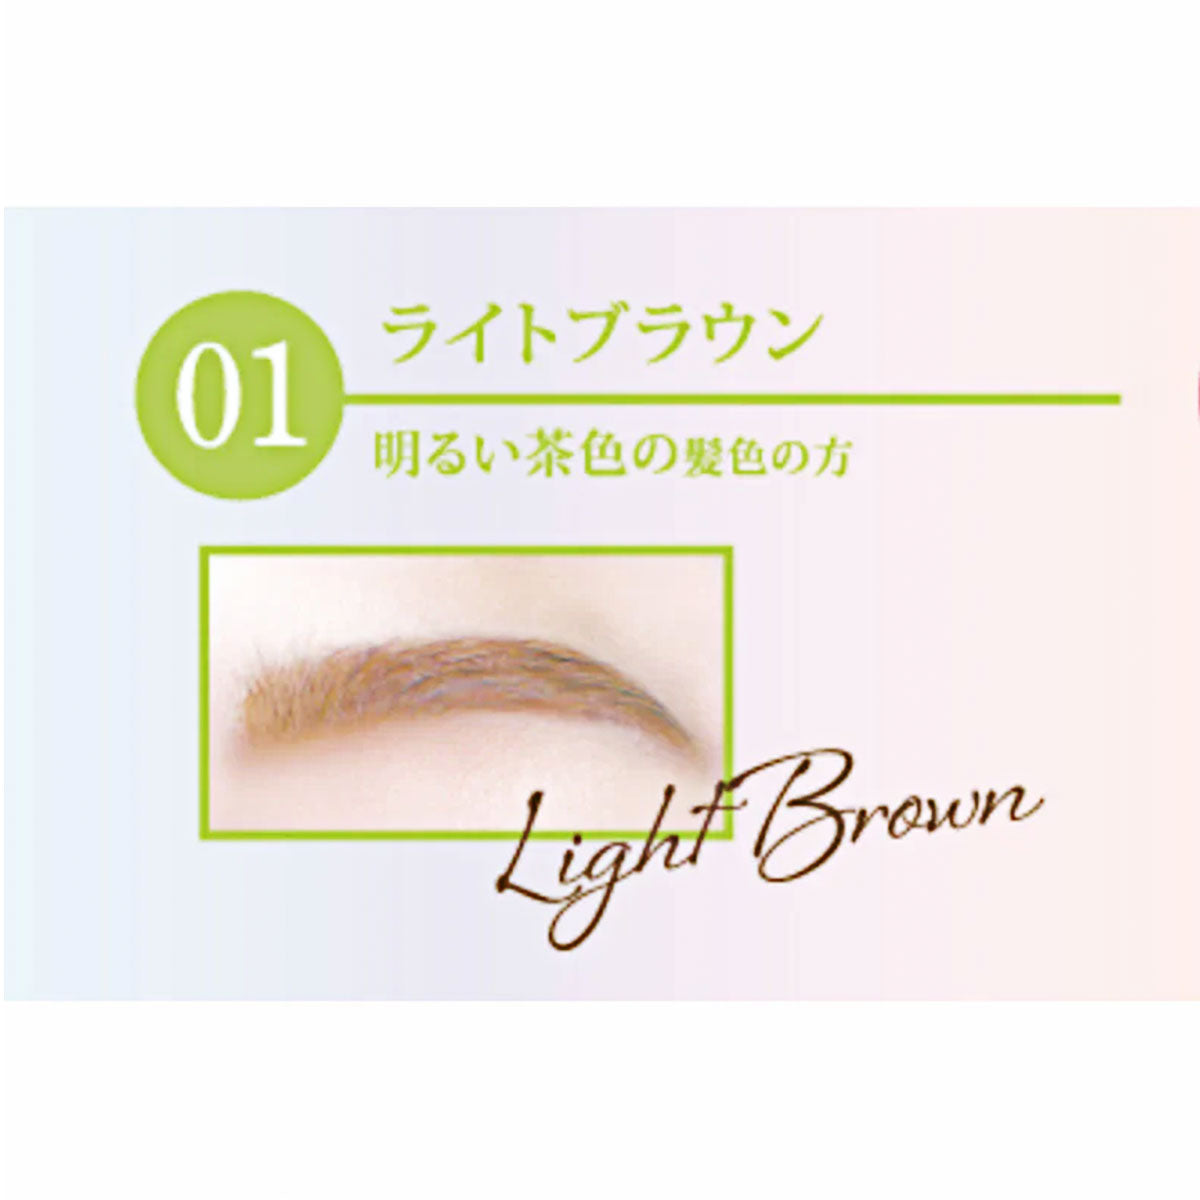 One Day Tattoo Lasting 3 Way Eyebrow #01 Light brown (Old Version)